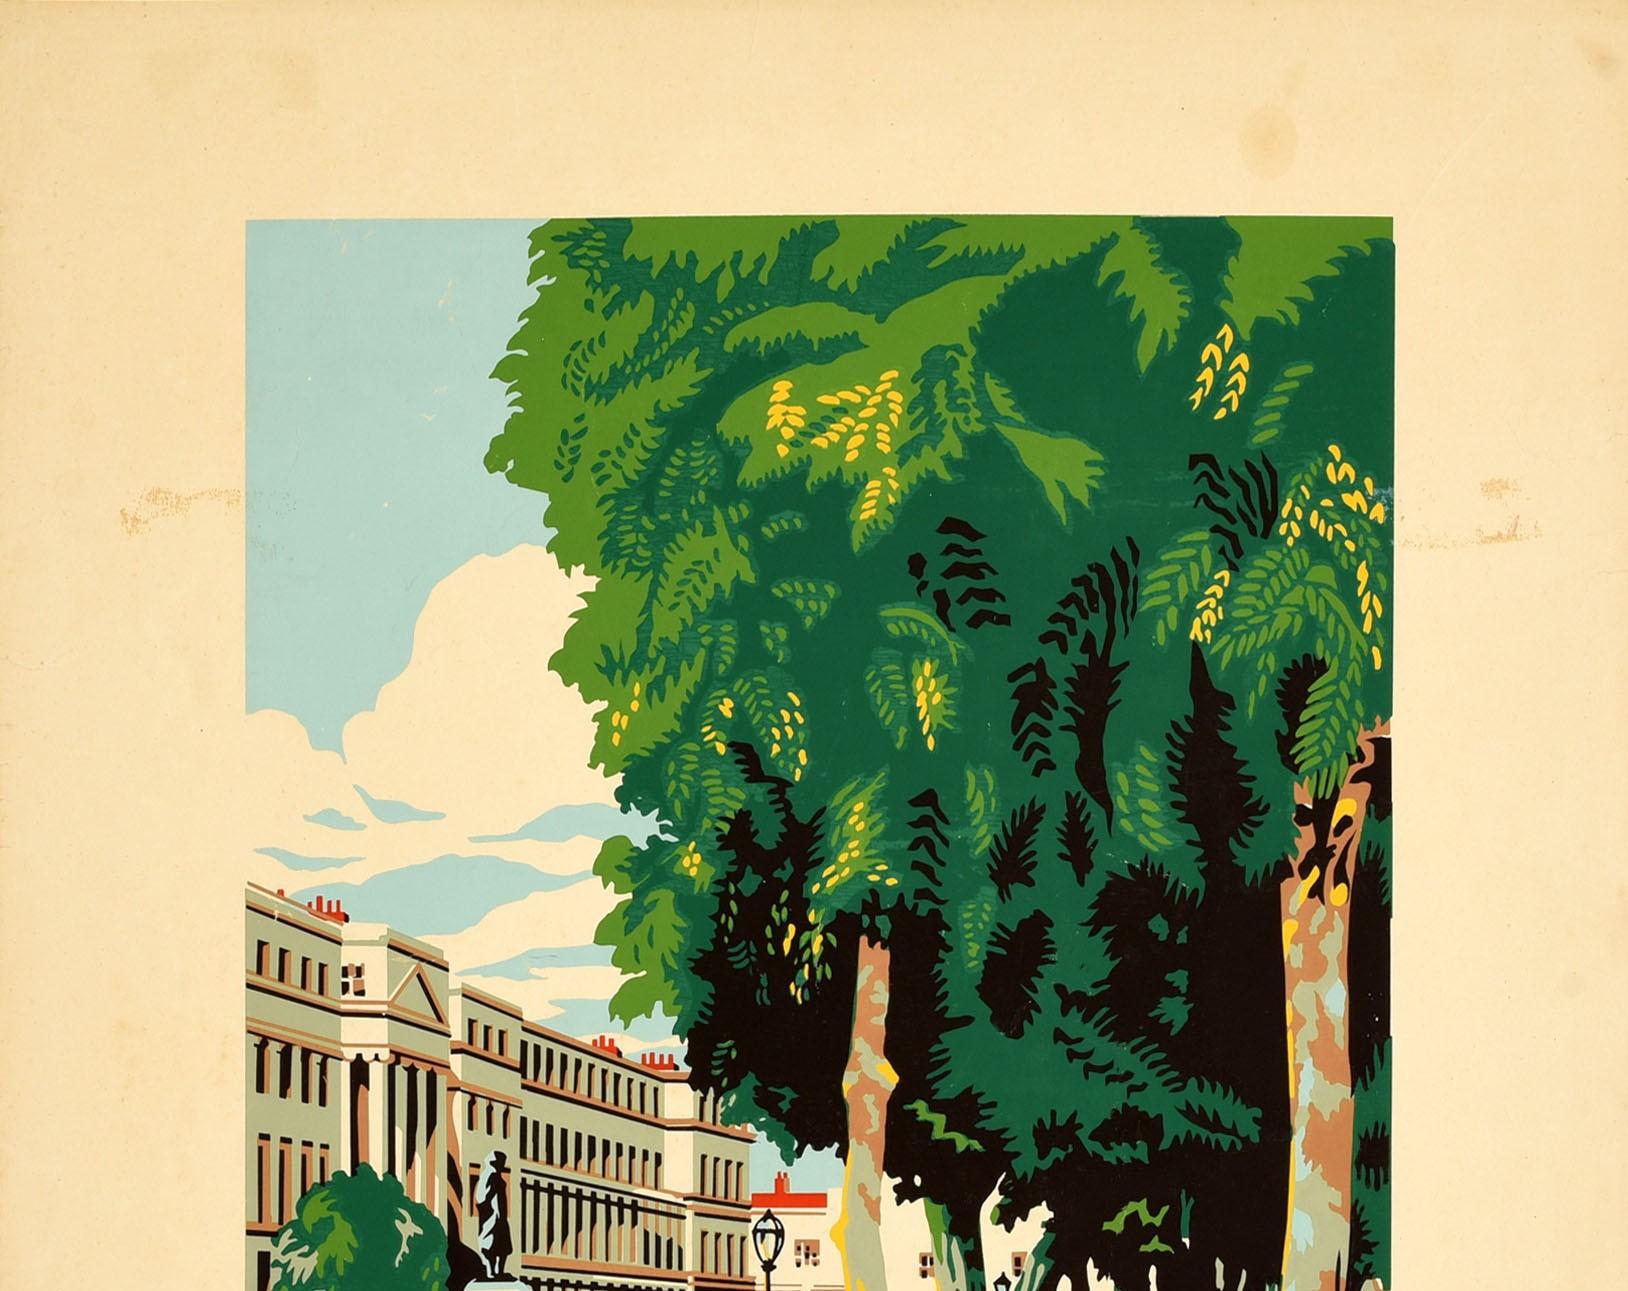 Original vintage Art Deco travel poster for Cheltenham Spa - Stately buildings and stately trees combine to characterise this delightful Midland town - featuring a stunning design showing smartly dressed ladies walking below trees near a classic car